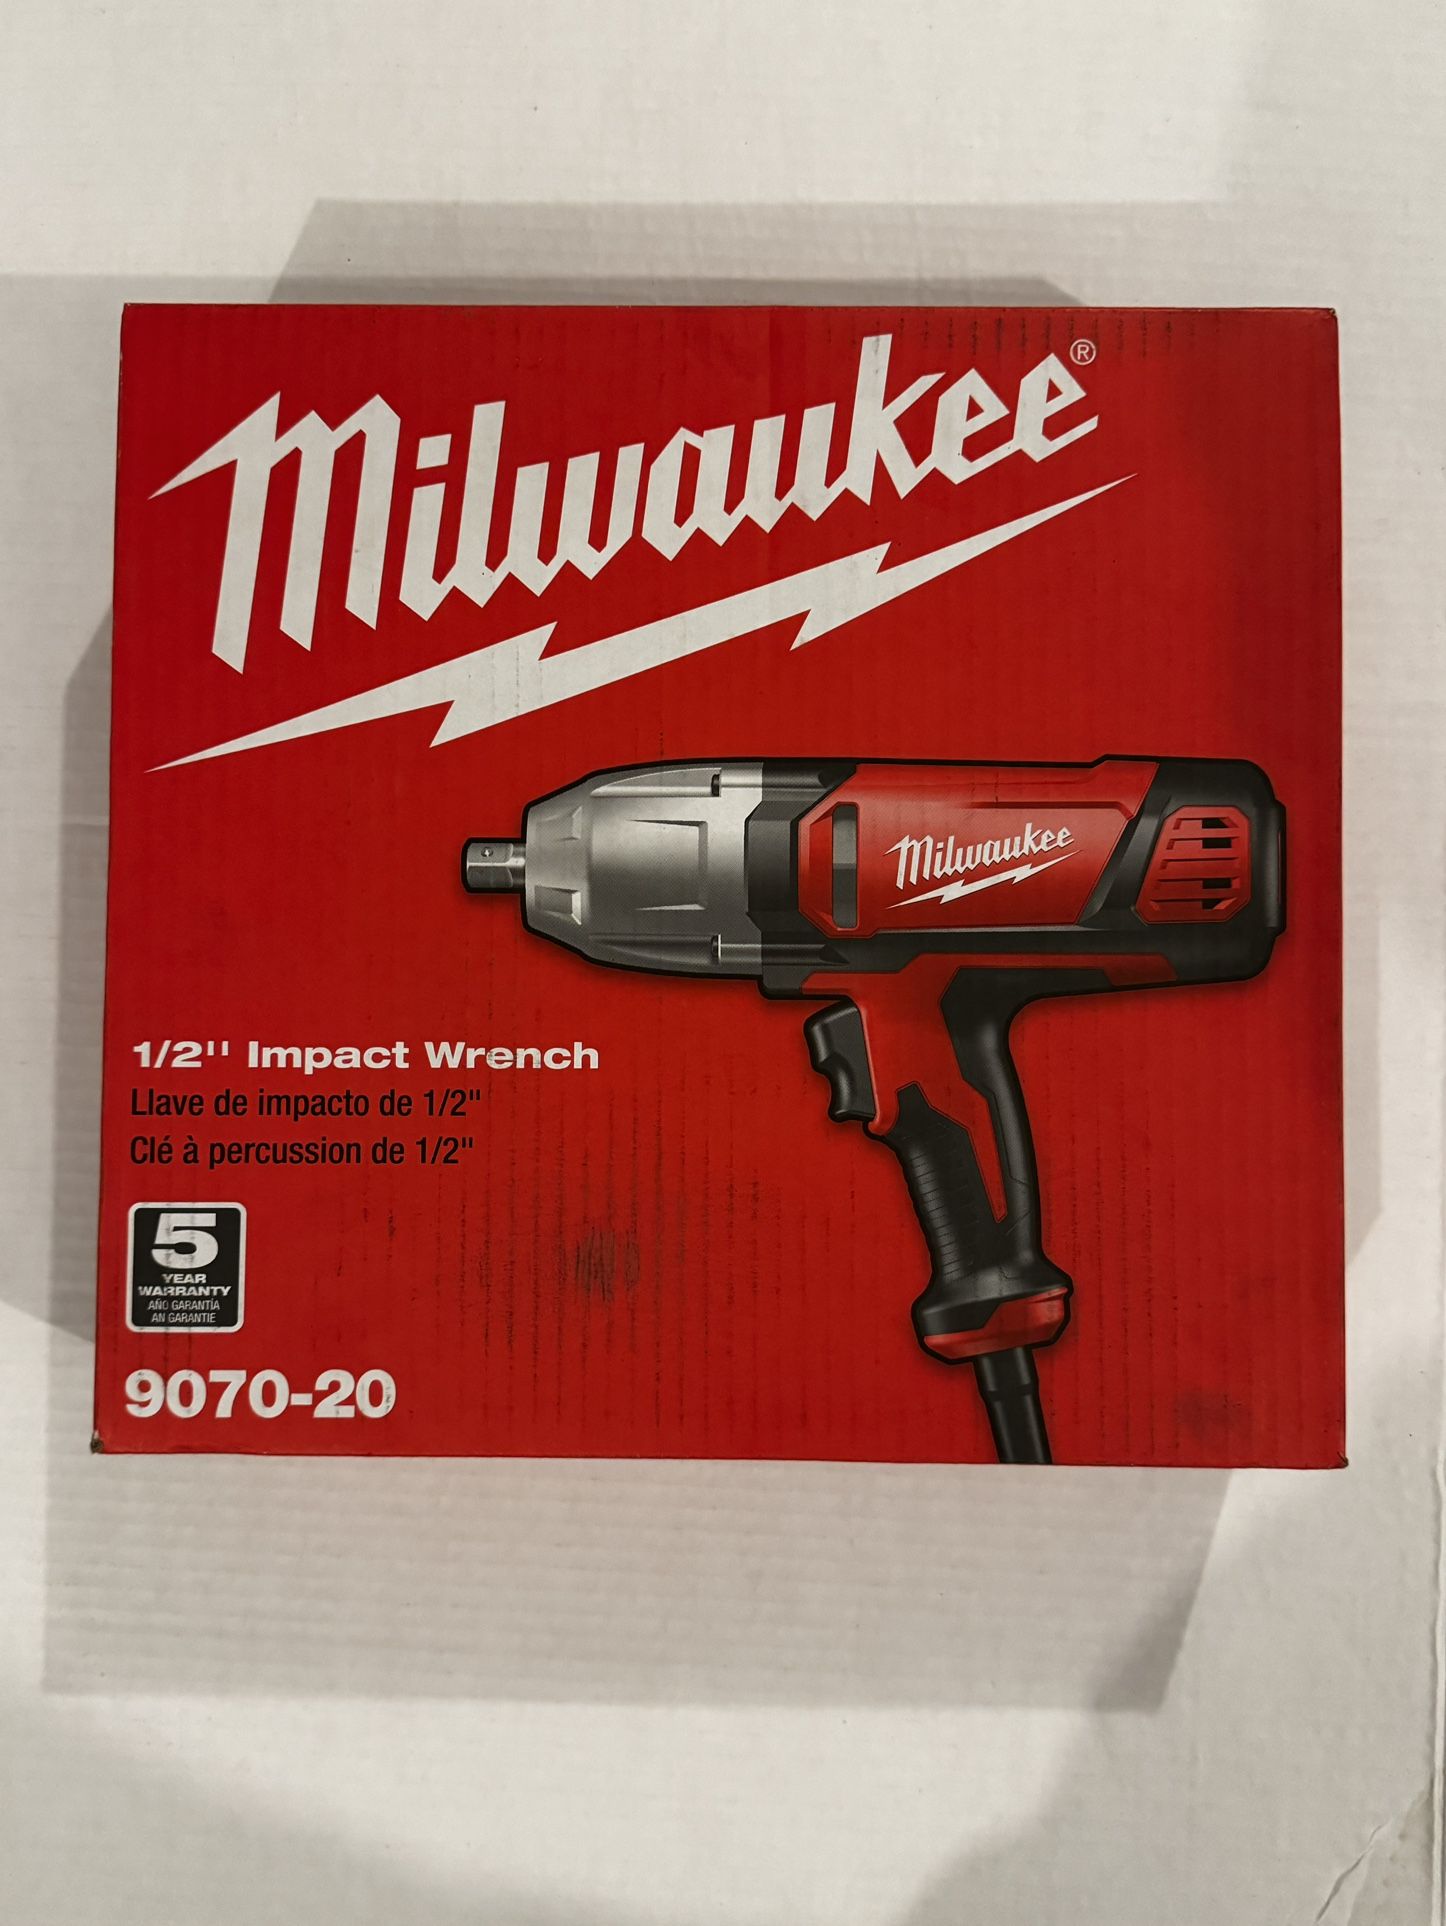 1/2 Impact Wrench